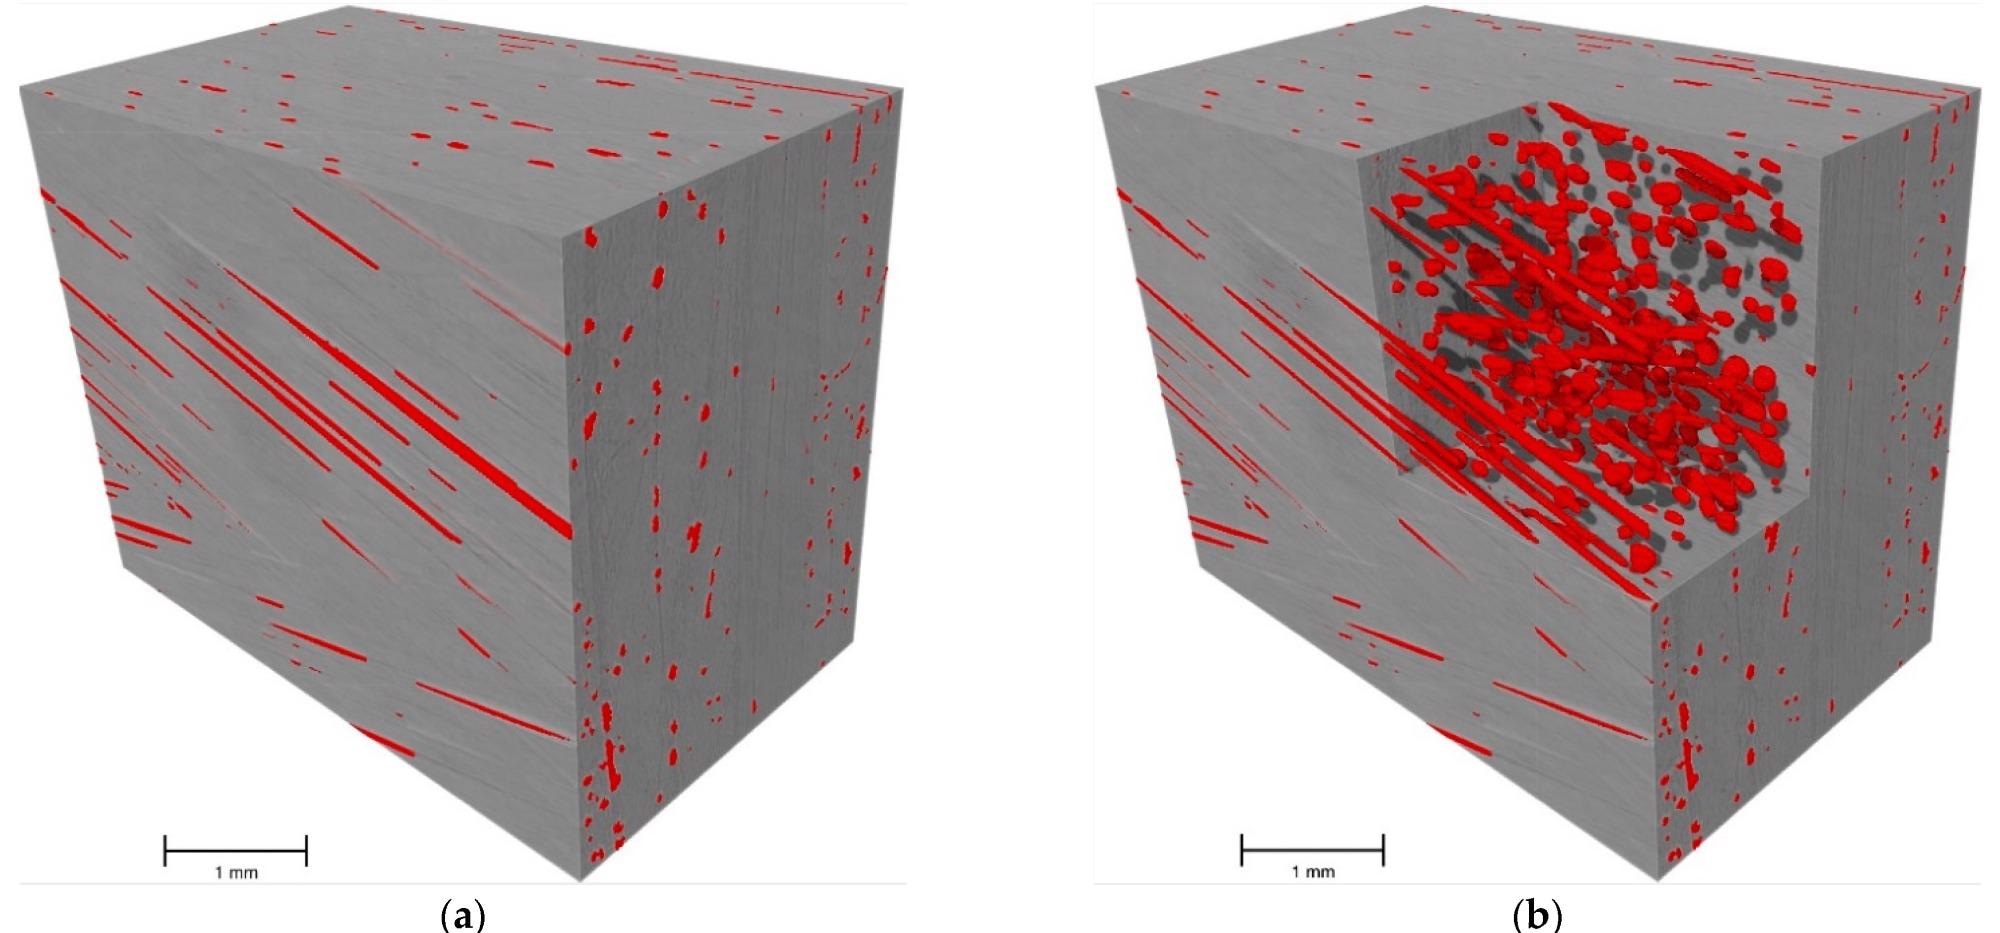 Scanned sample “µCT 2” showing the composite in grey and the voids in red; (a) the scanned sample, (b) a section cut showing the voids in the sample.